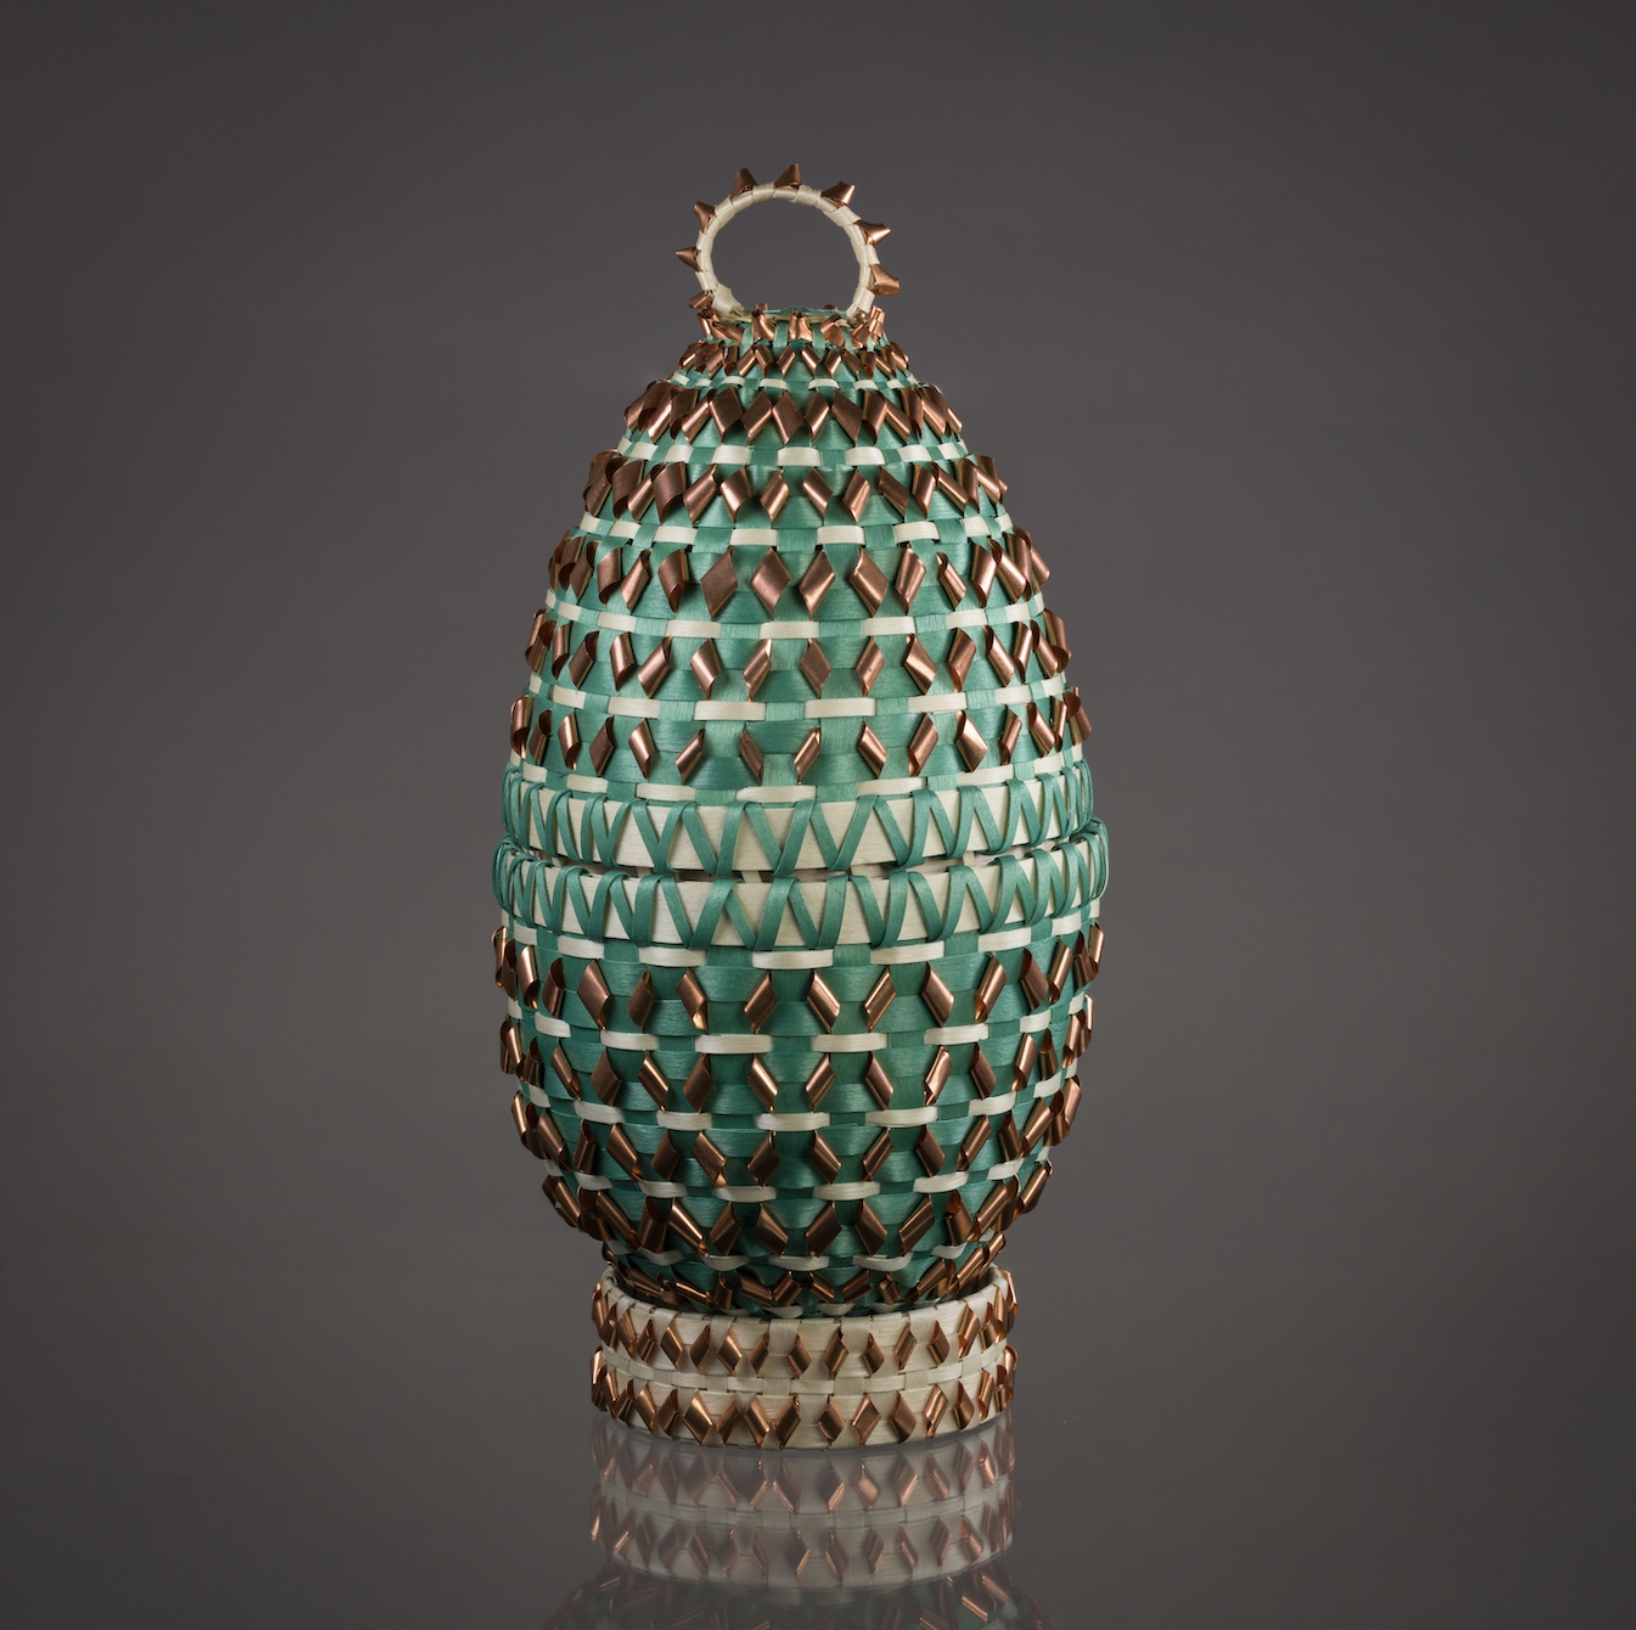 An egg shaped basket woven with green and copper material